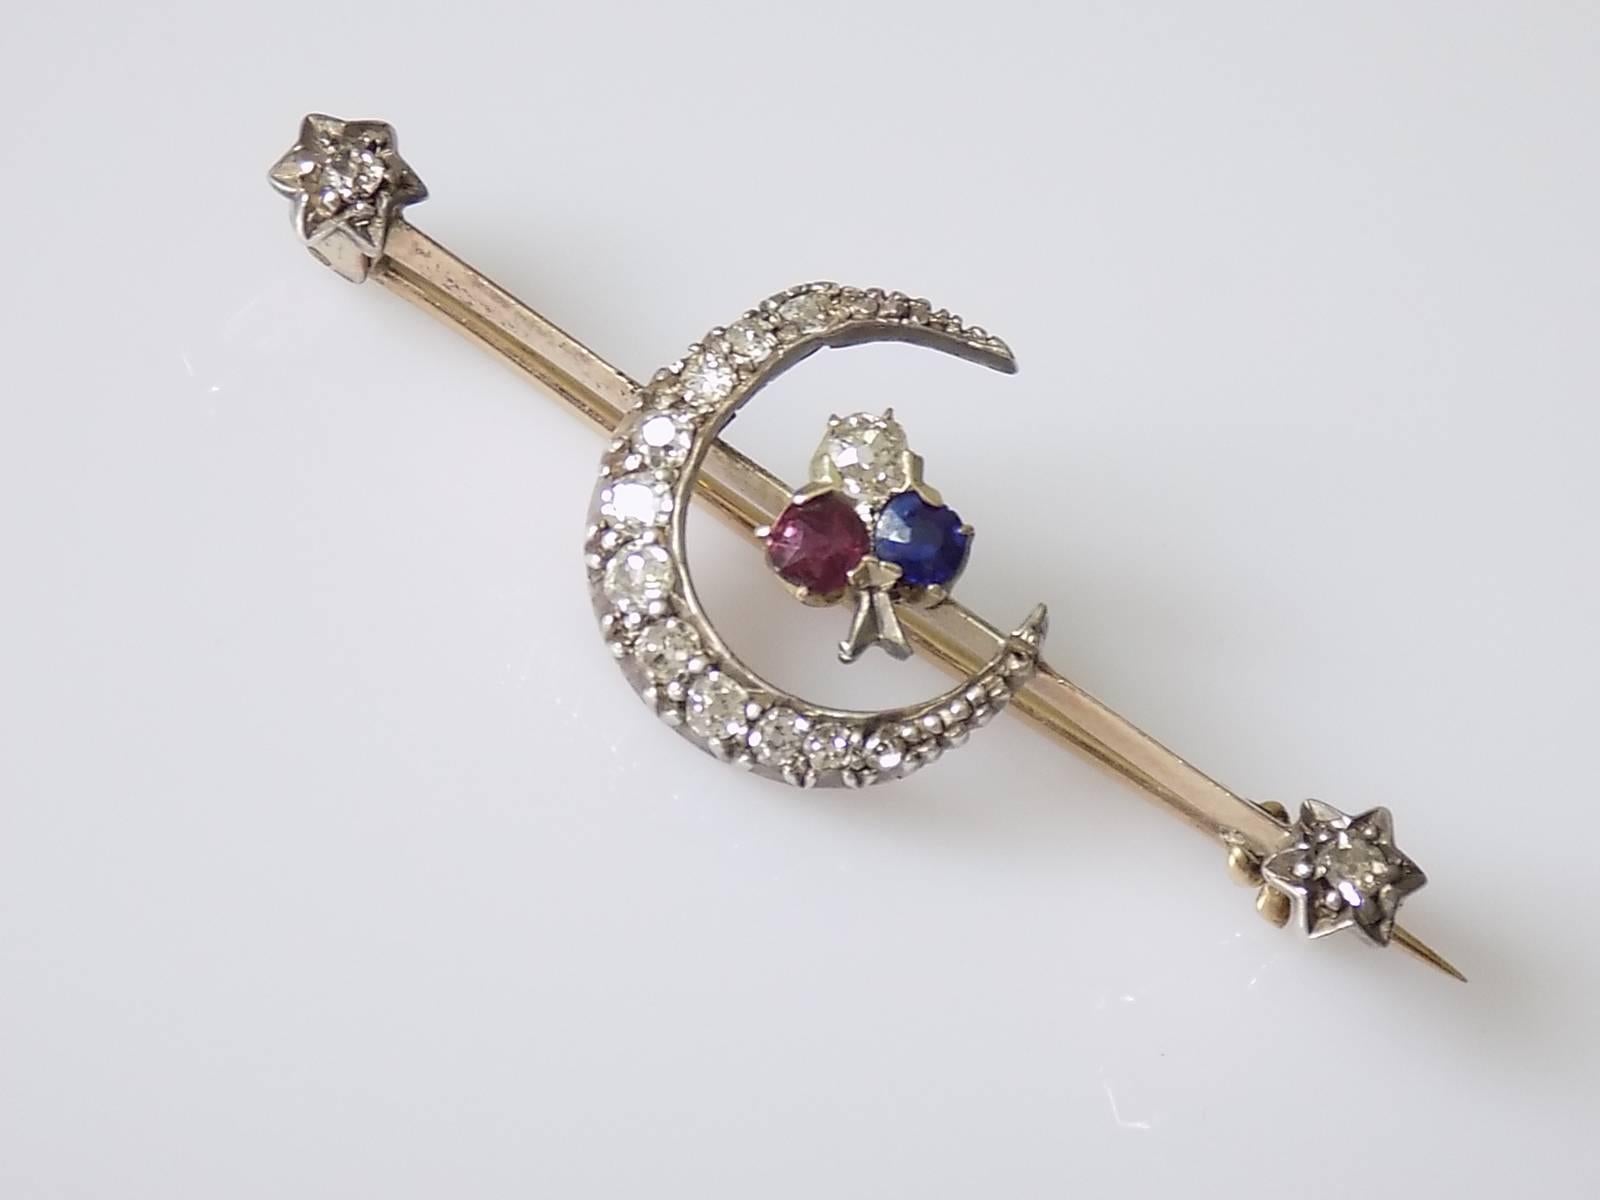 A Beautiful Victorian c.1890s Gold and Silver bar brooch with a Ruby, Diamond and Sapphire clover motive inside of Diamond Crescent and Diamond Stars on the ends. English origin.
Total Length 42mm
Height 16mm
Weight 3.0gr
Unmarked, tested 9 Carat